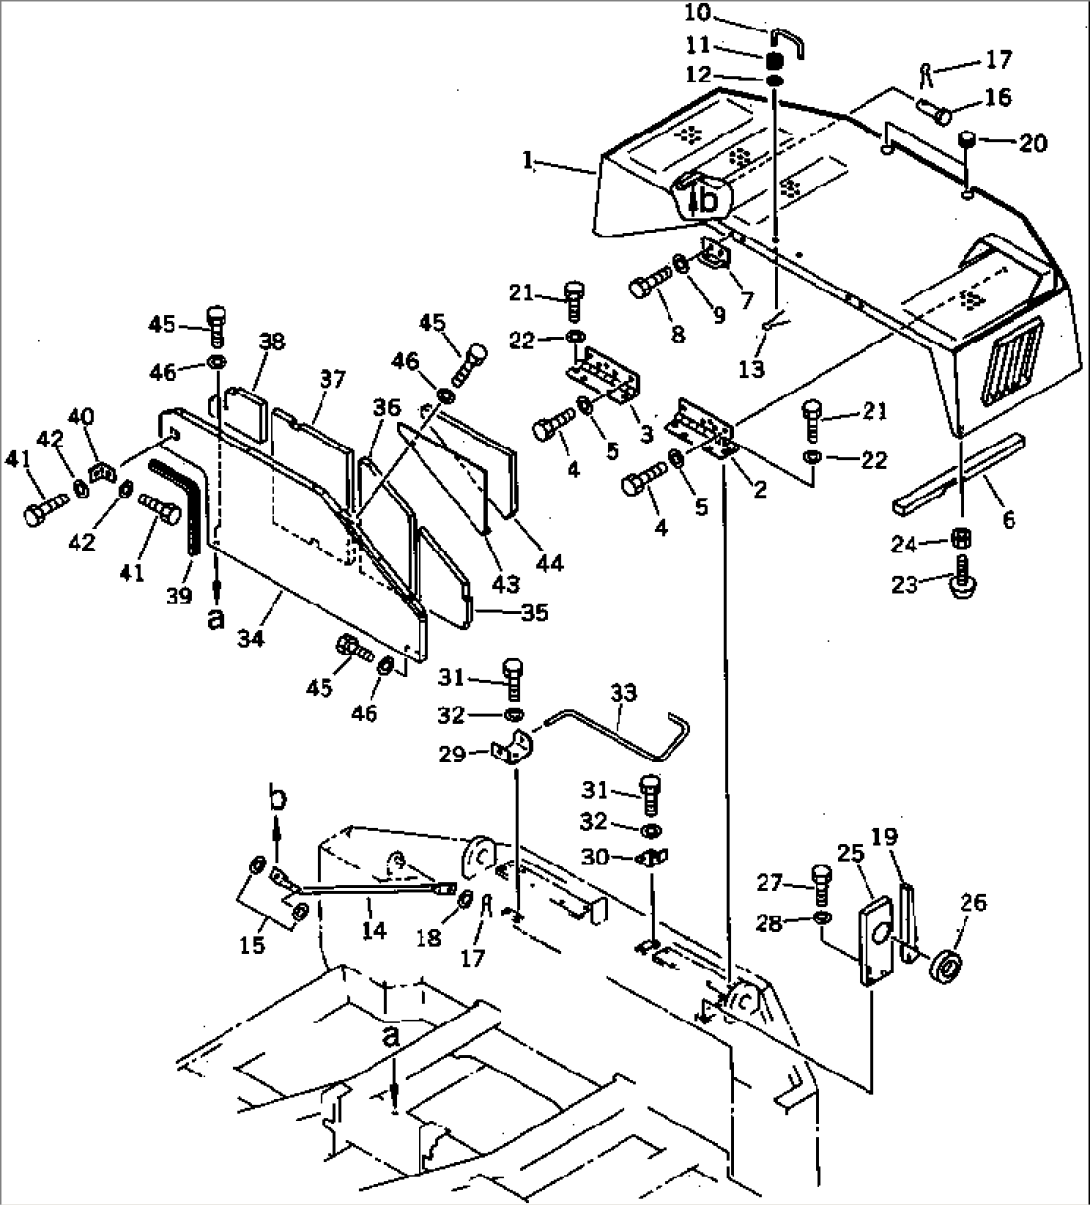 MACHINERY COMPARTMENT (1/3)